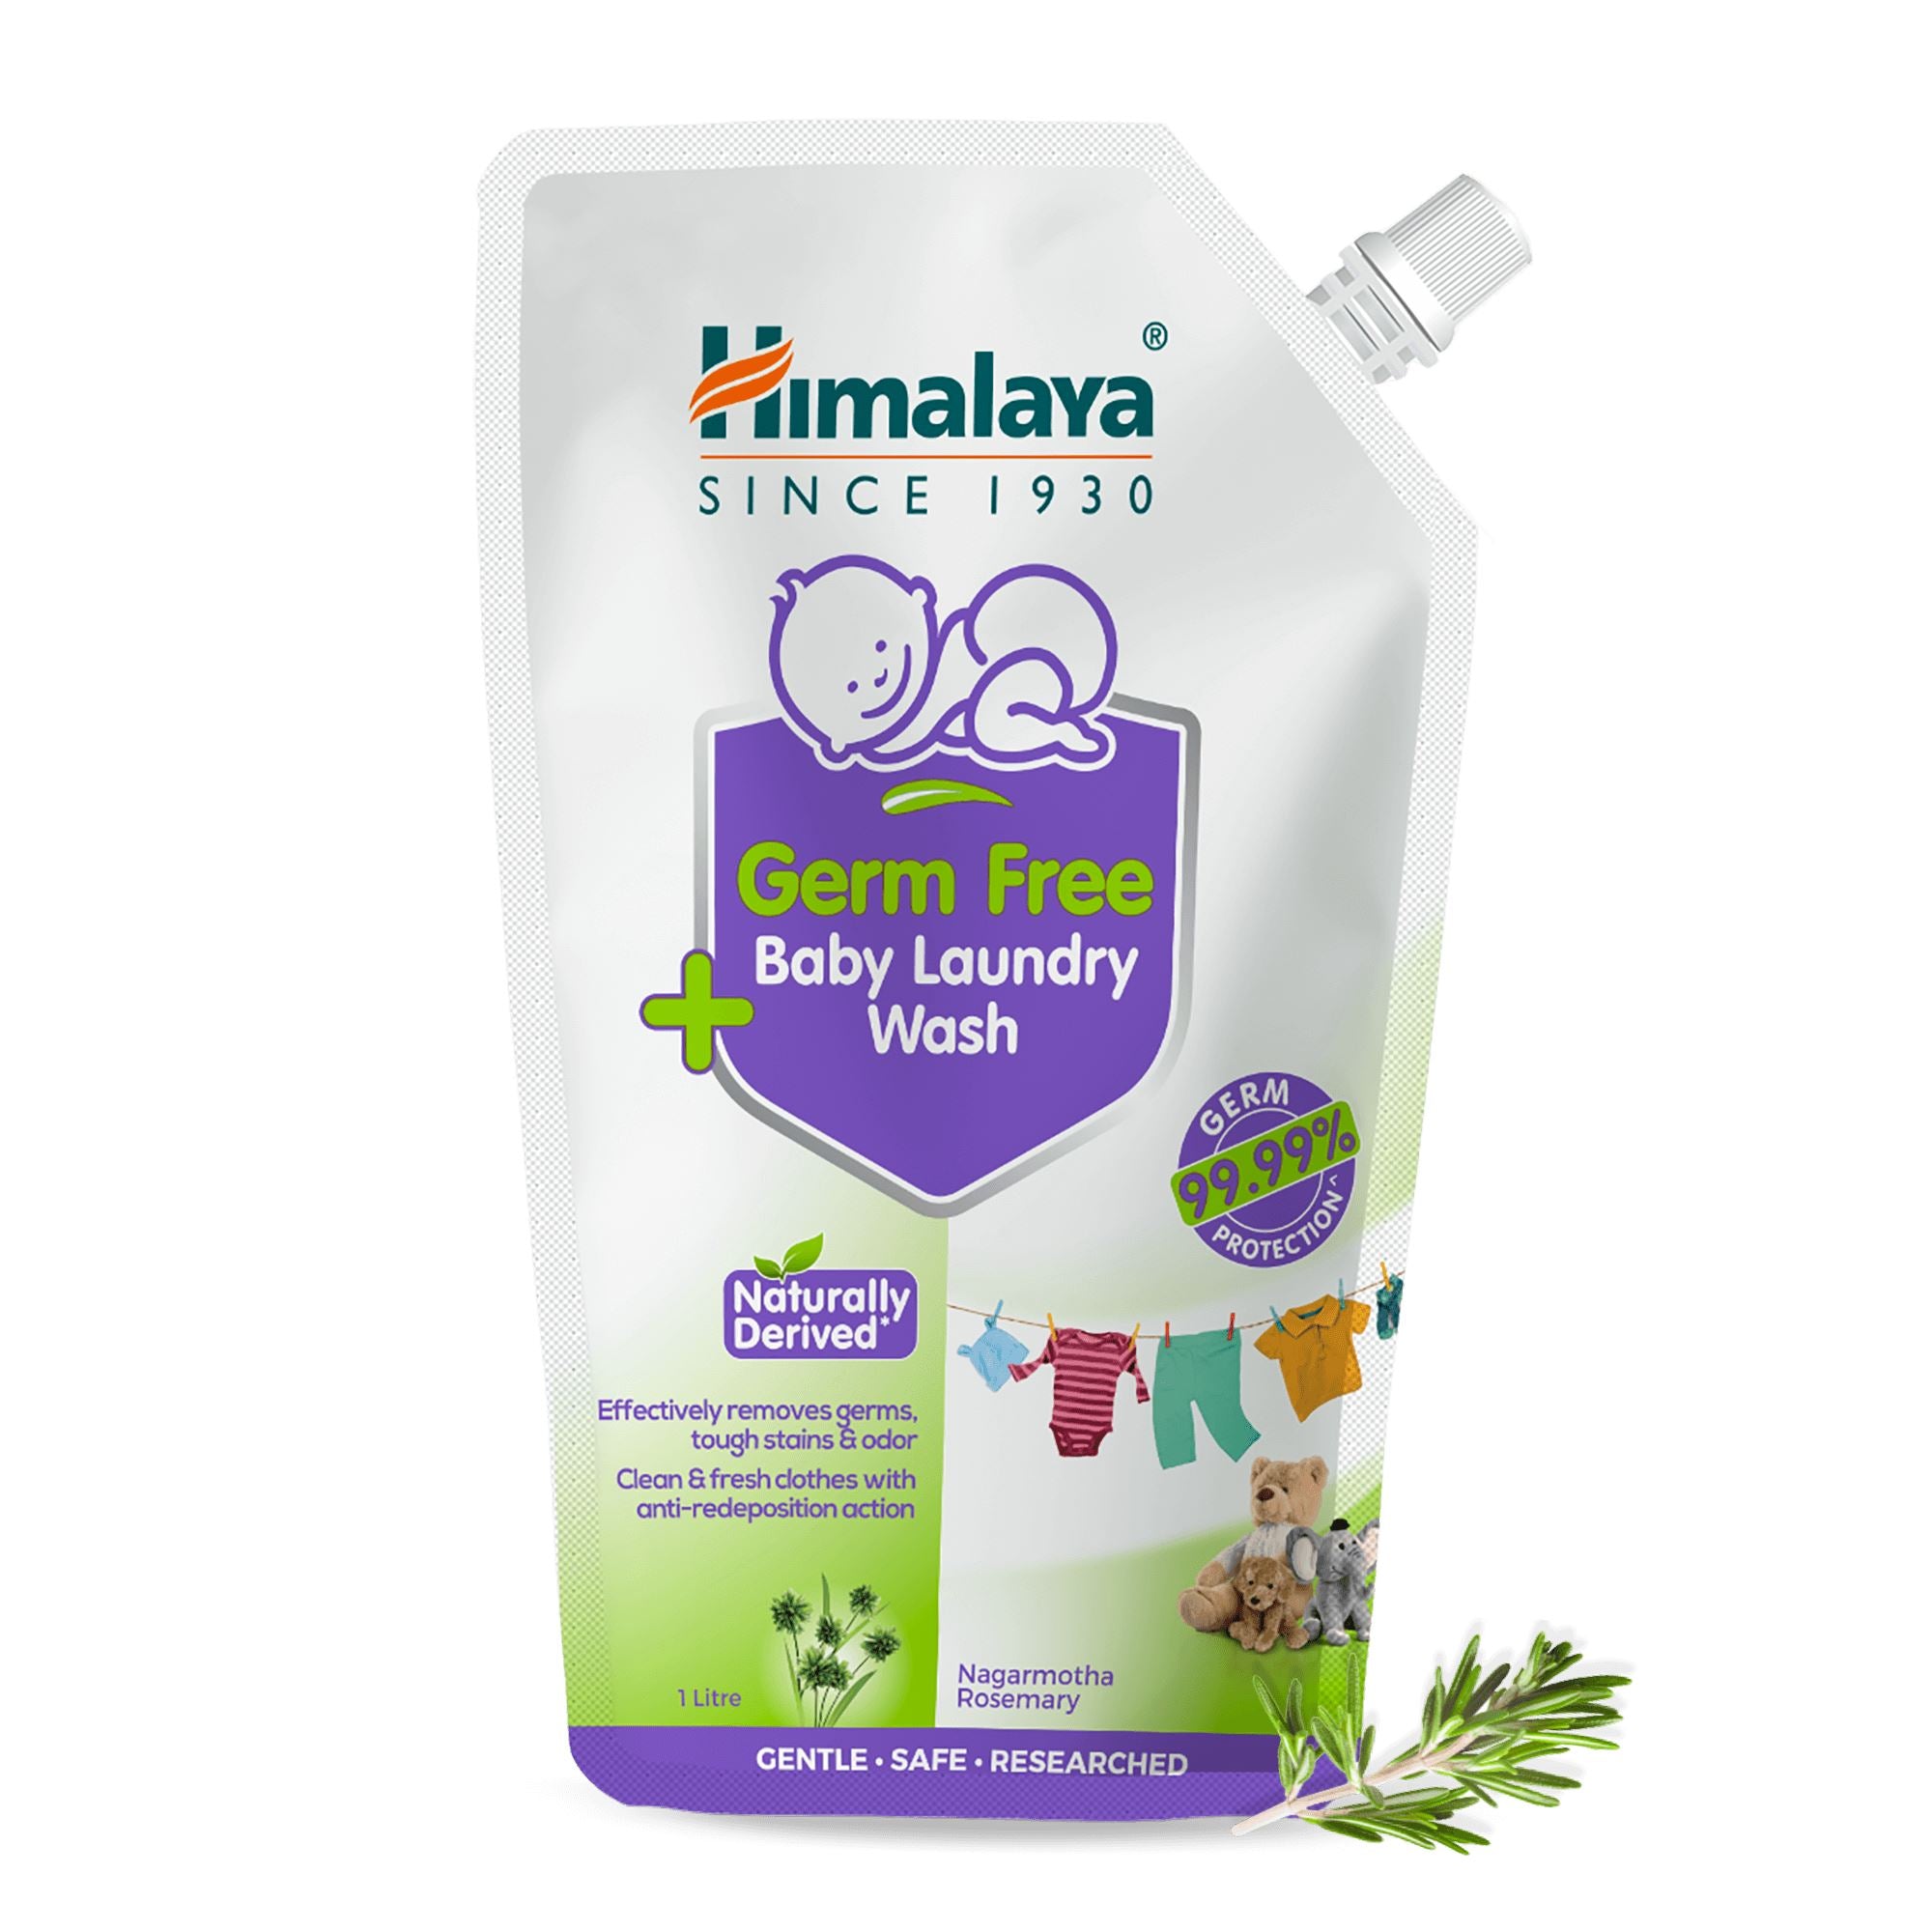 Himalaya Germ Free Baby Laundry Wash 1 Litre Pouch - Removes Germs and Odor